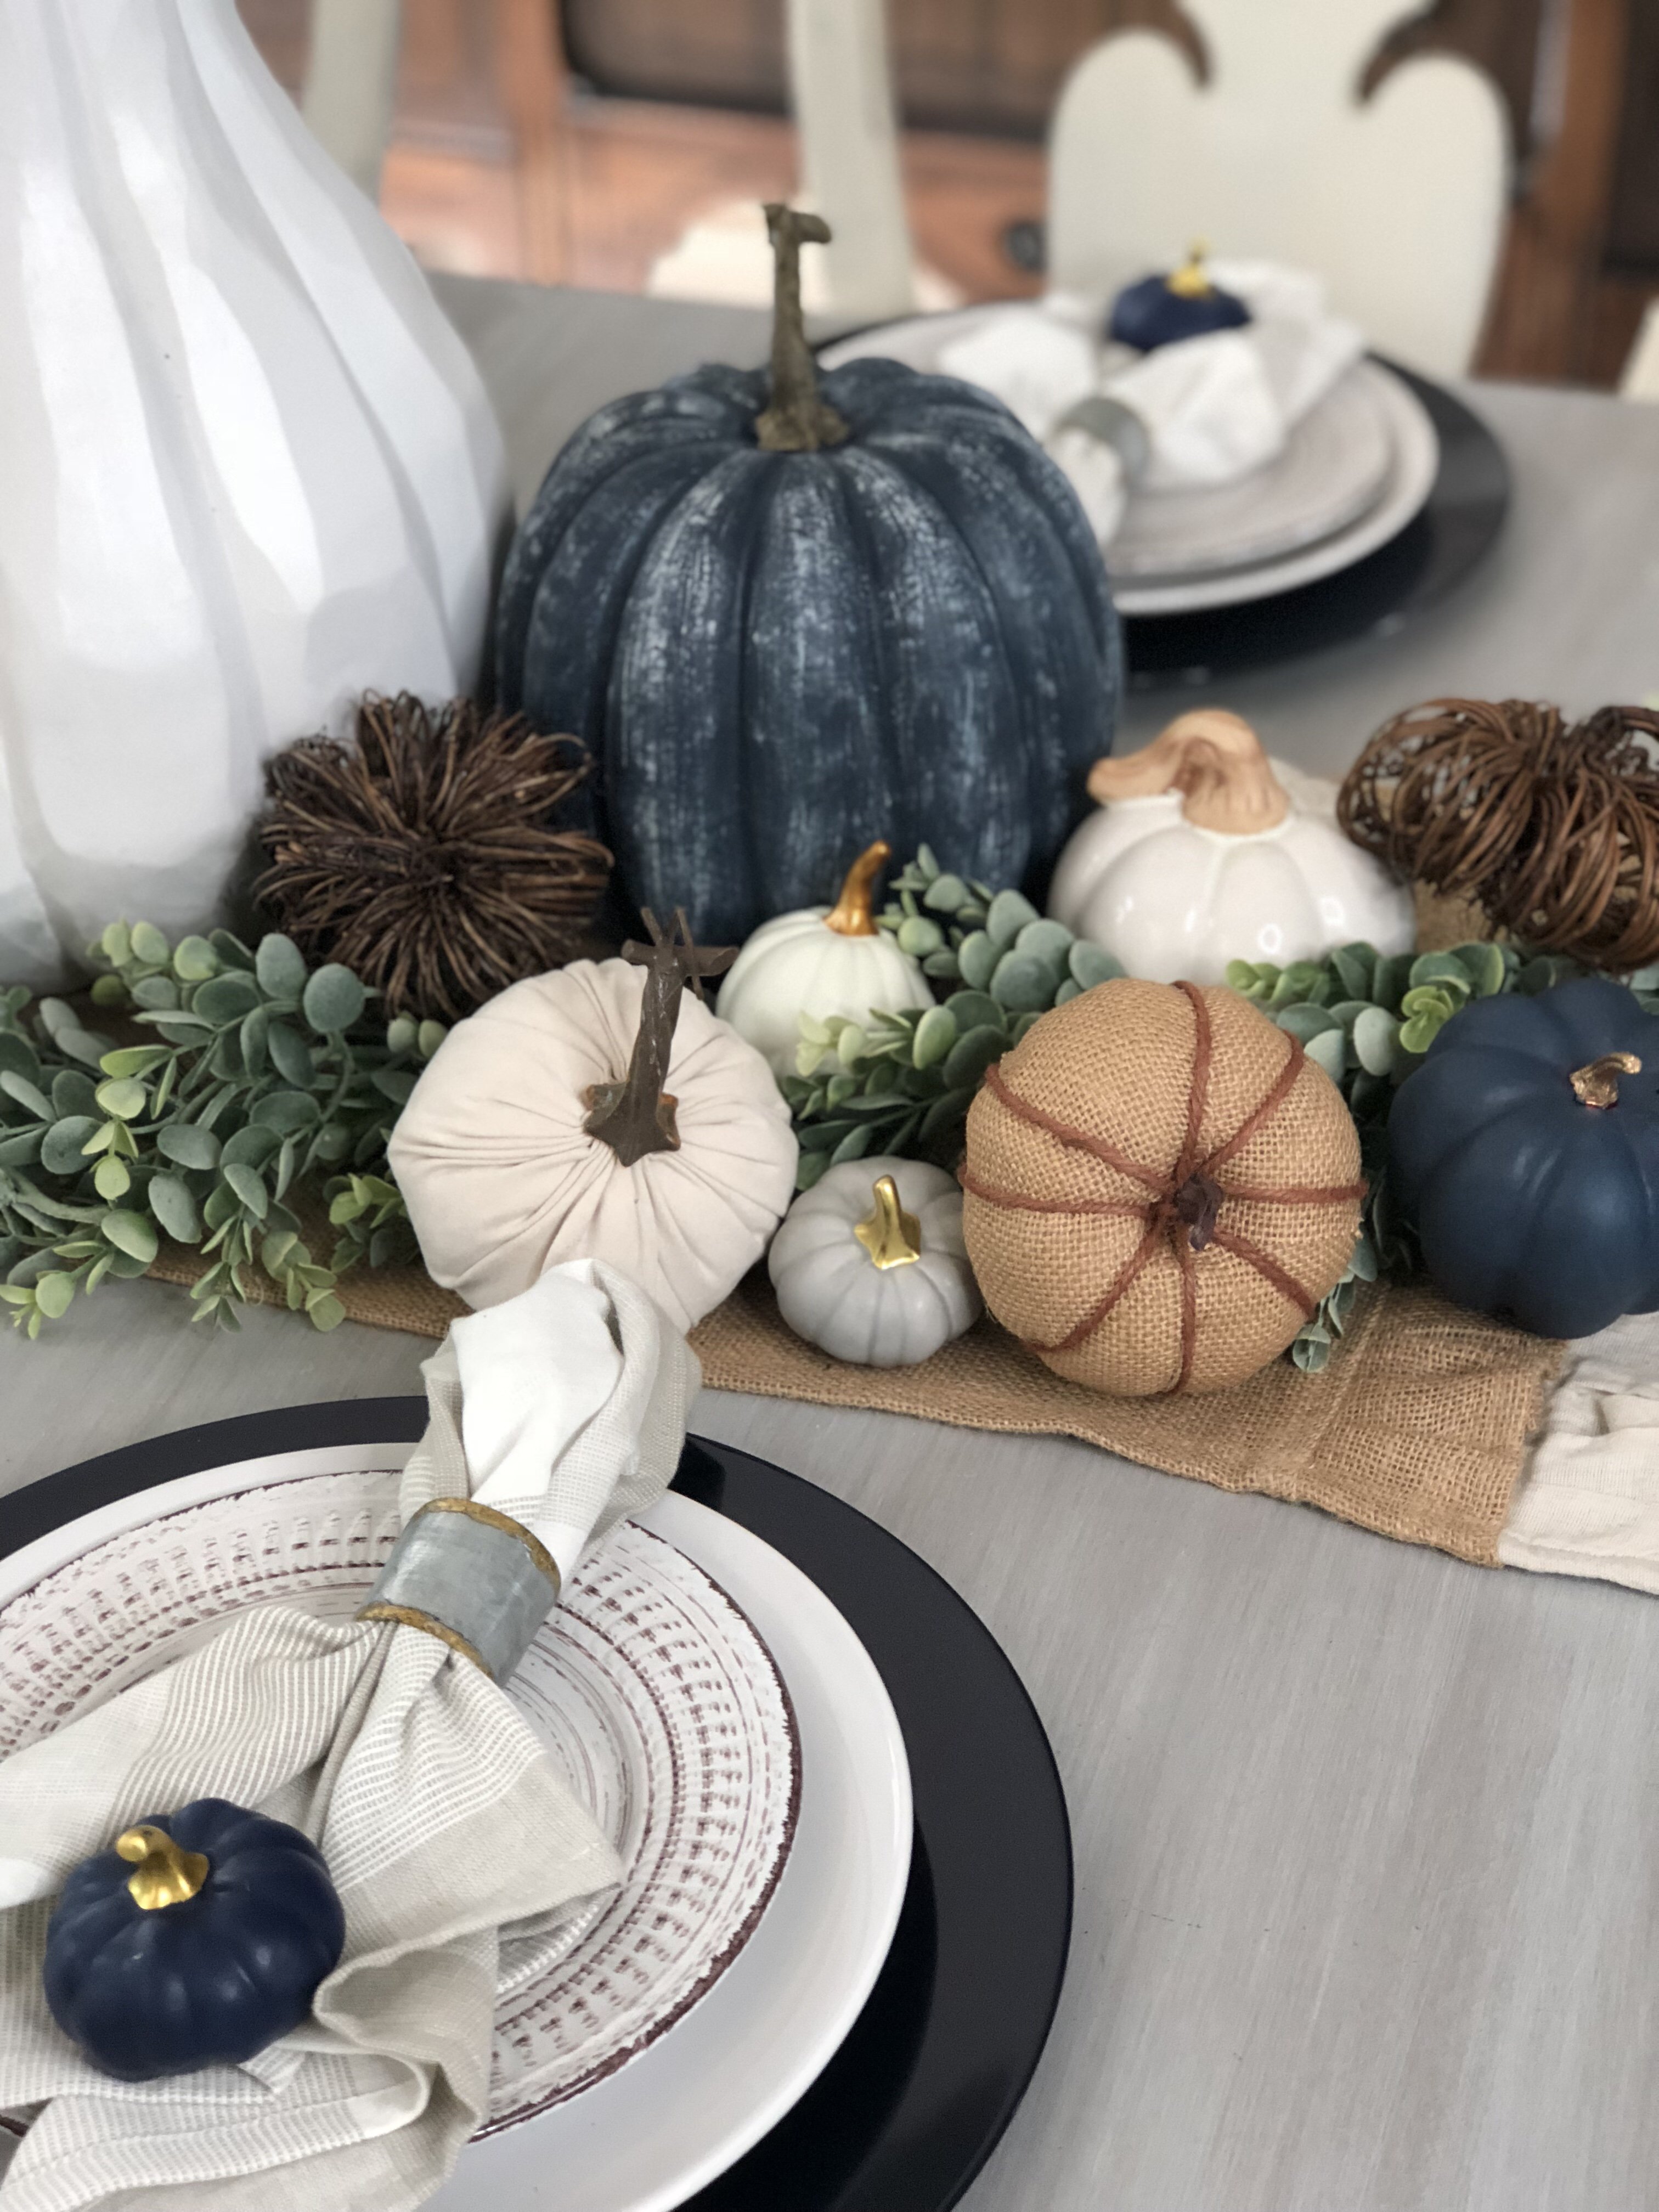 My fall dining room, inspired by Navy Blue pumpkins! The easy way to get this look!